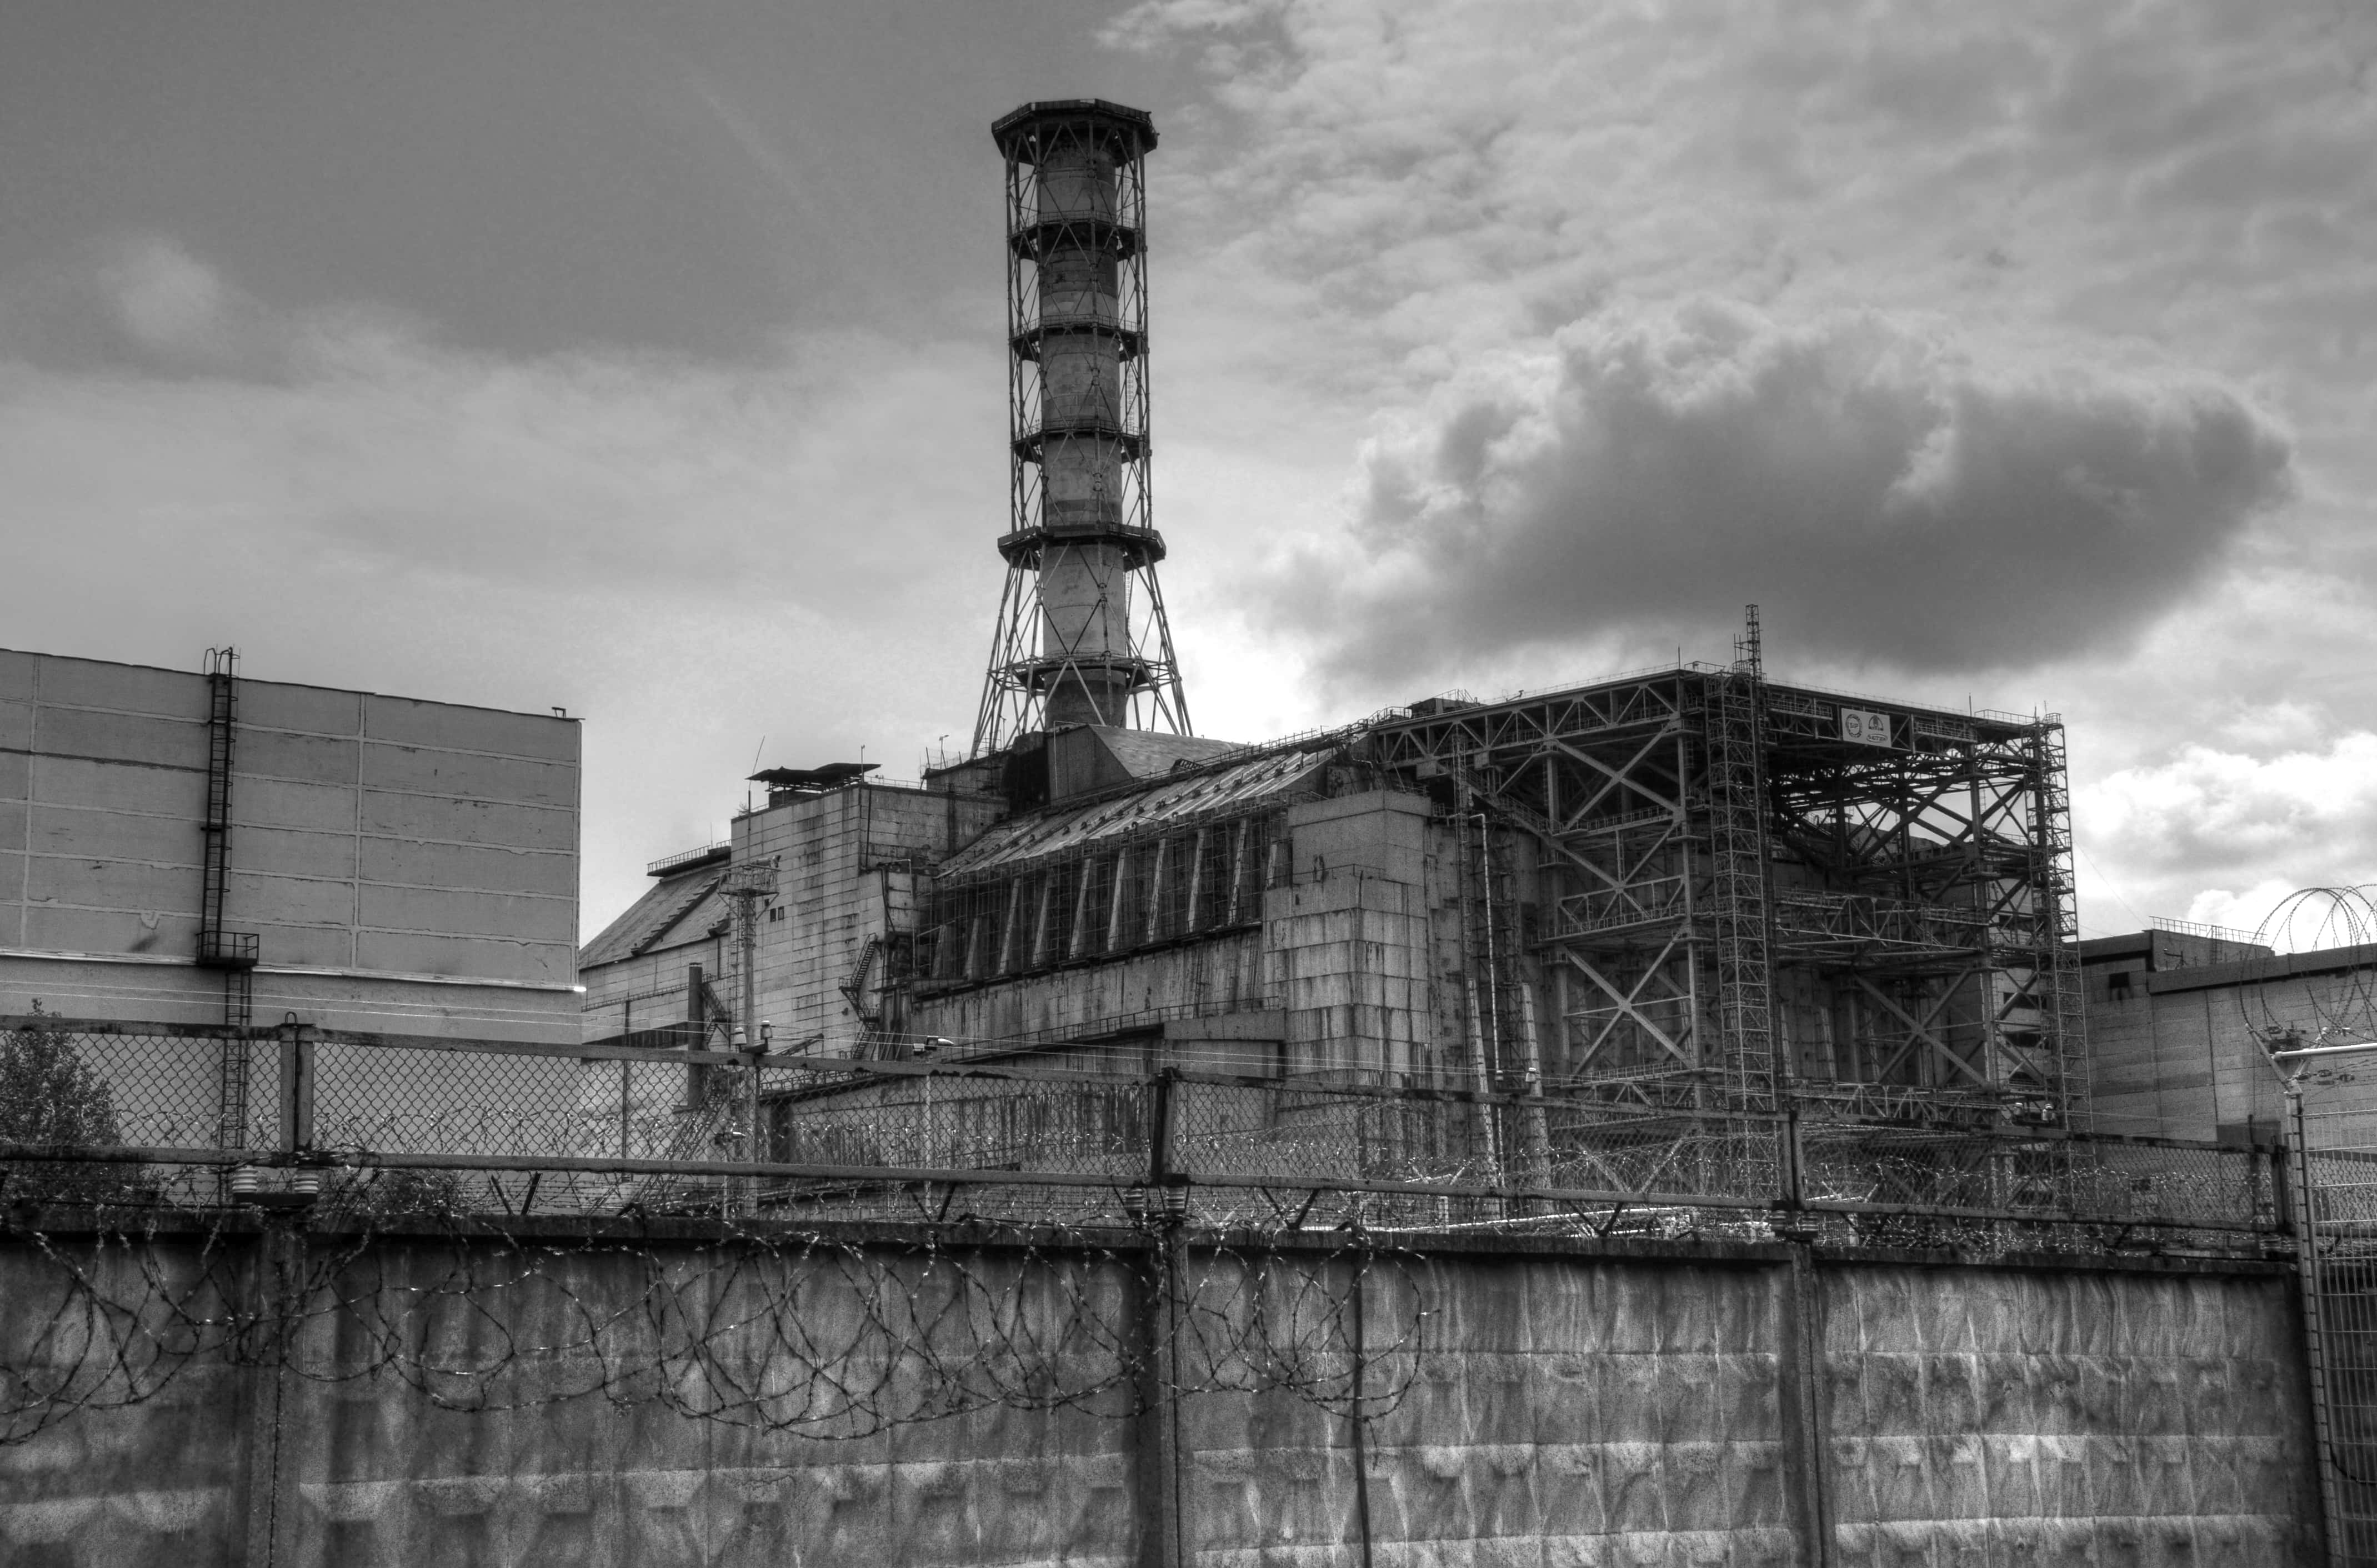 Chernobyl Disaster Facts